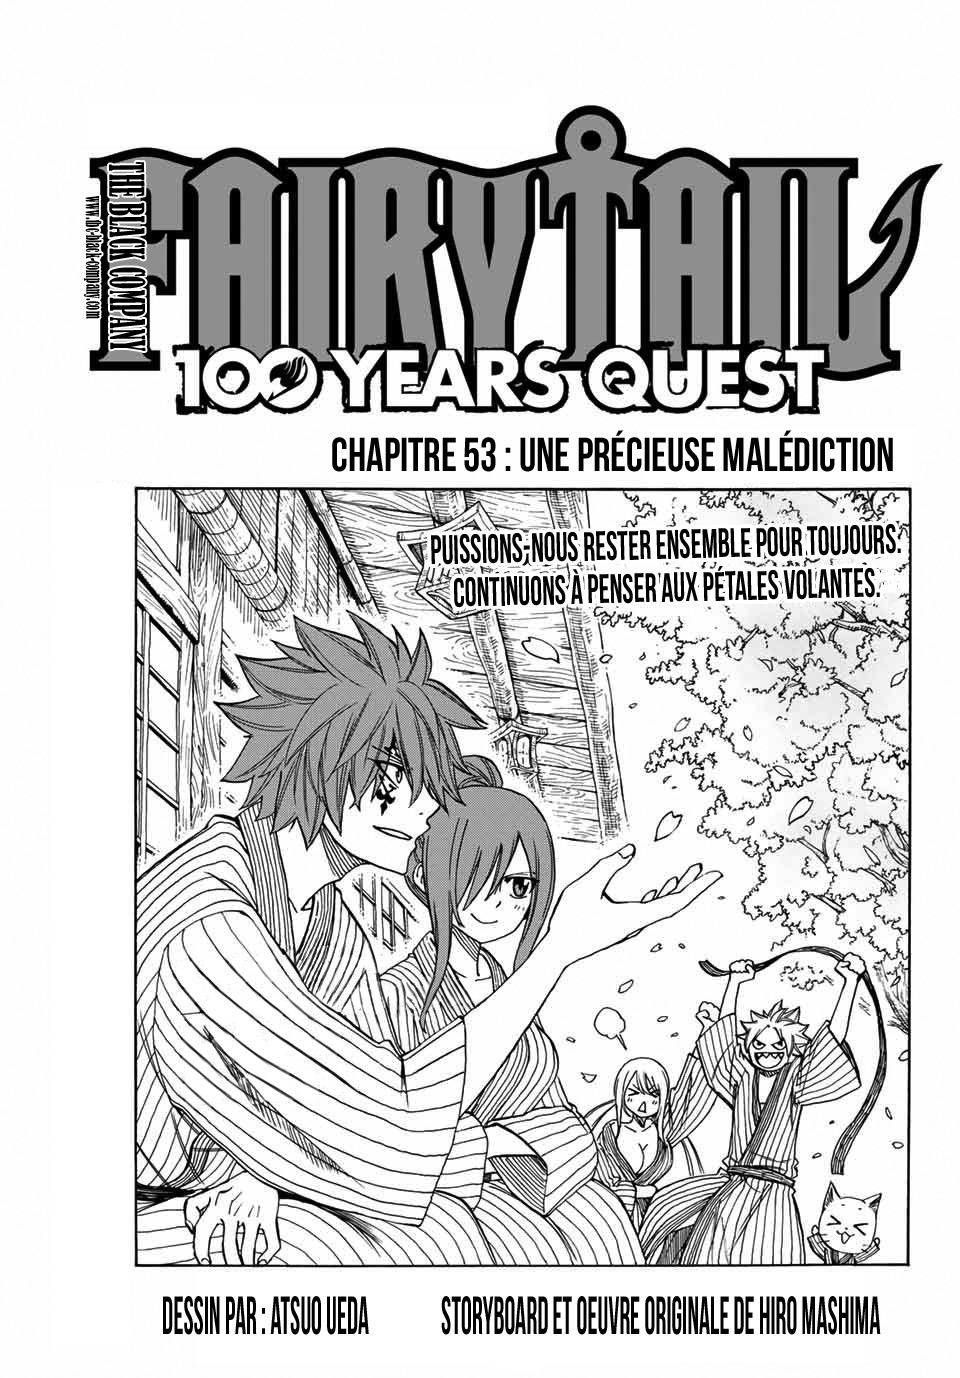 Fairy Tail 100 Years Quest: Chapter chapitre-53 - Page 1